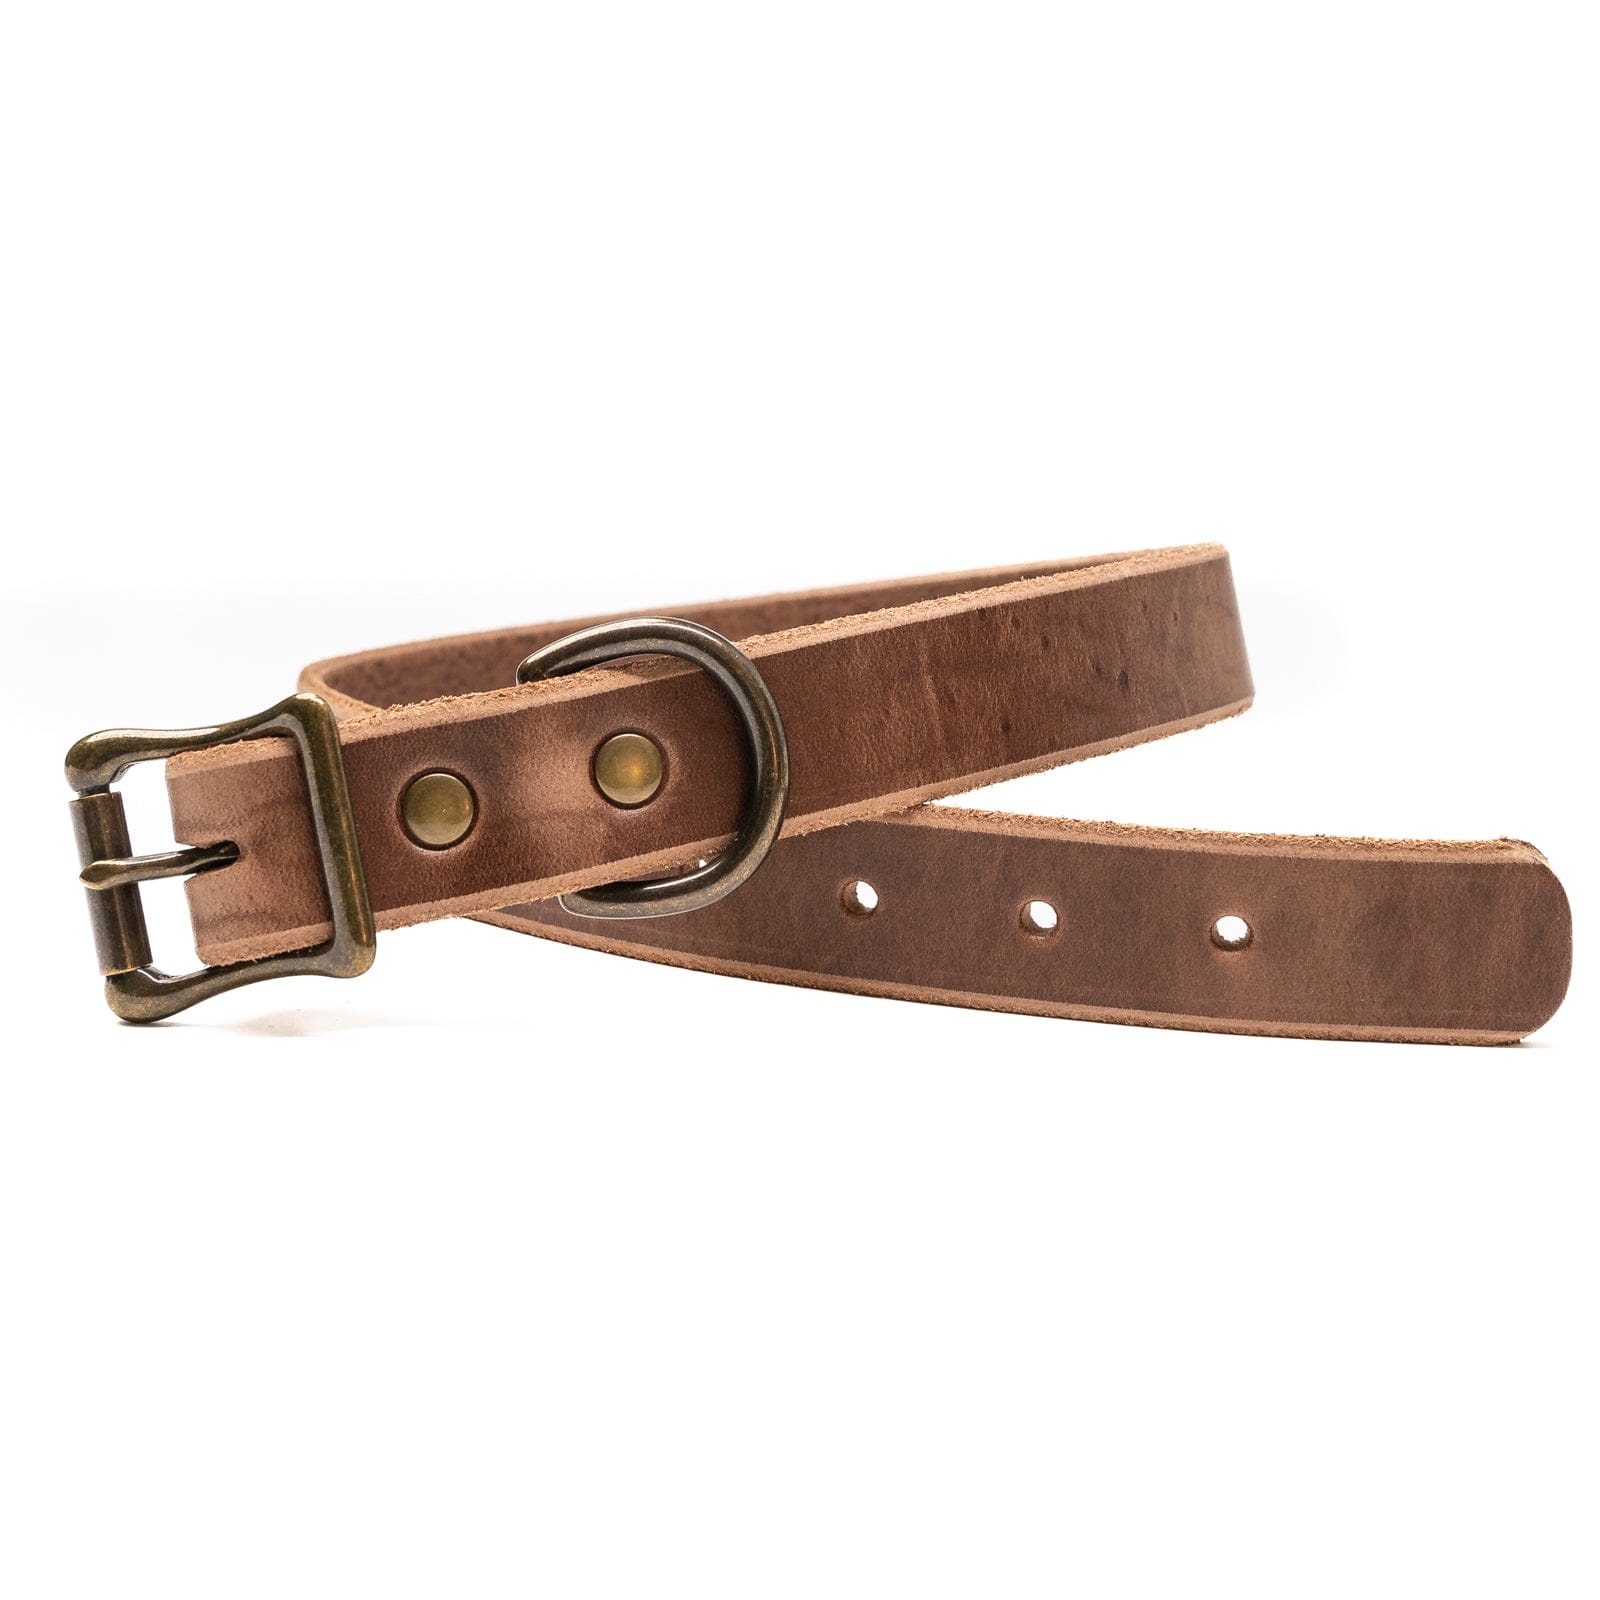 Leather Dog Collar - Natural Popov Leather